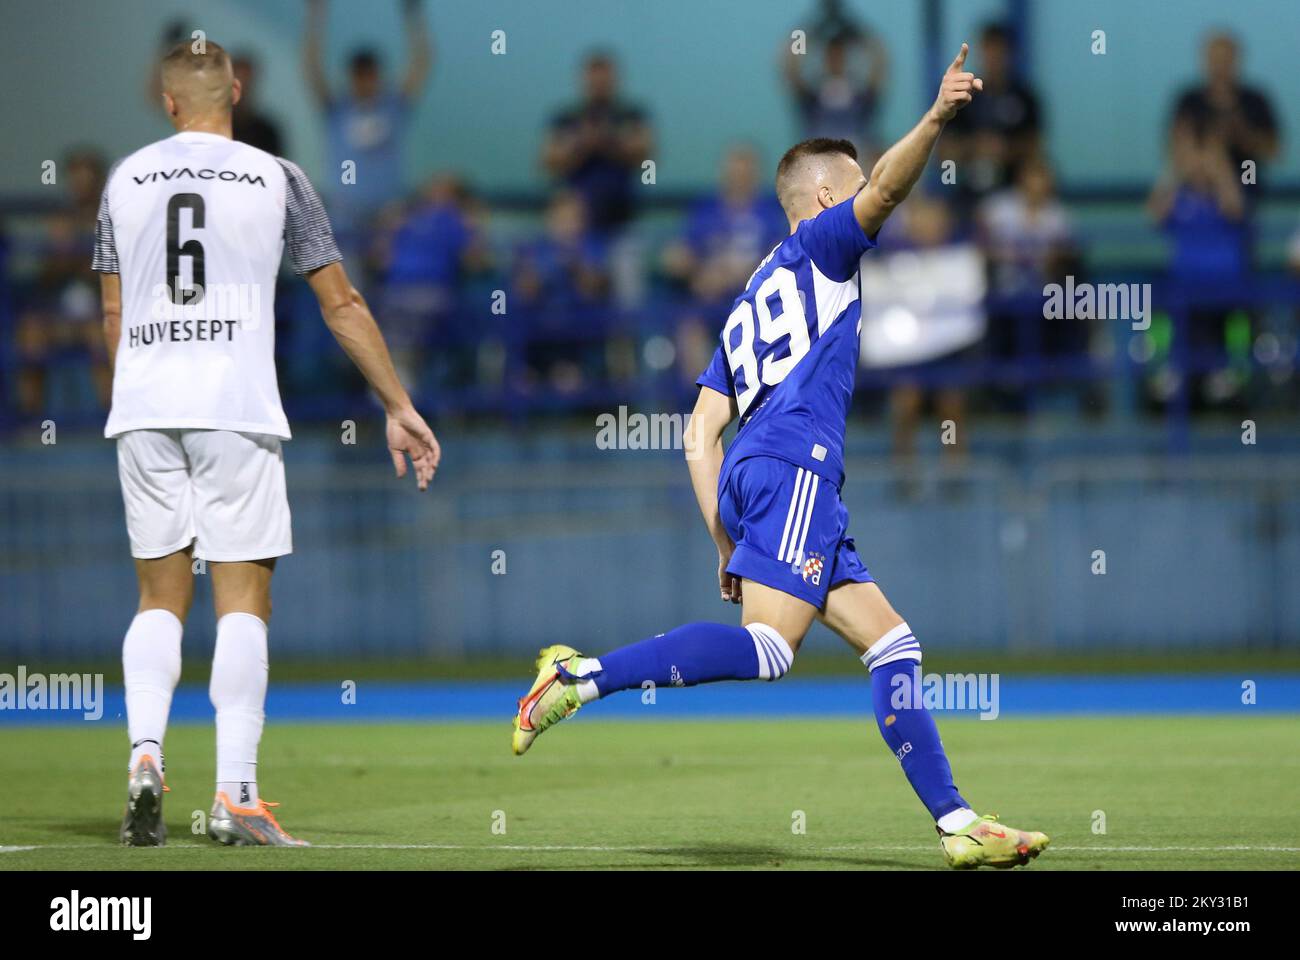 ZAGREB, CROATIA - AUGUST 09: Mislav Orsic and Josip Drmic of GNK Dinamo  Zagreb celebrating after scoring a goal during third qualifying round, 2nd  leg of UEFA Champions League match between GNK